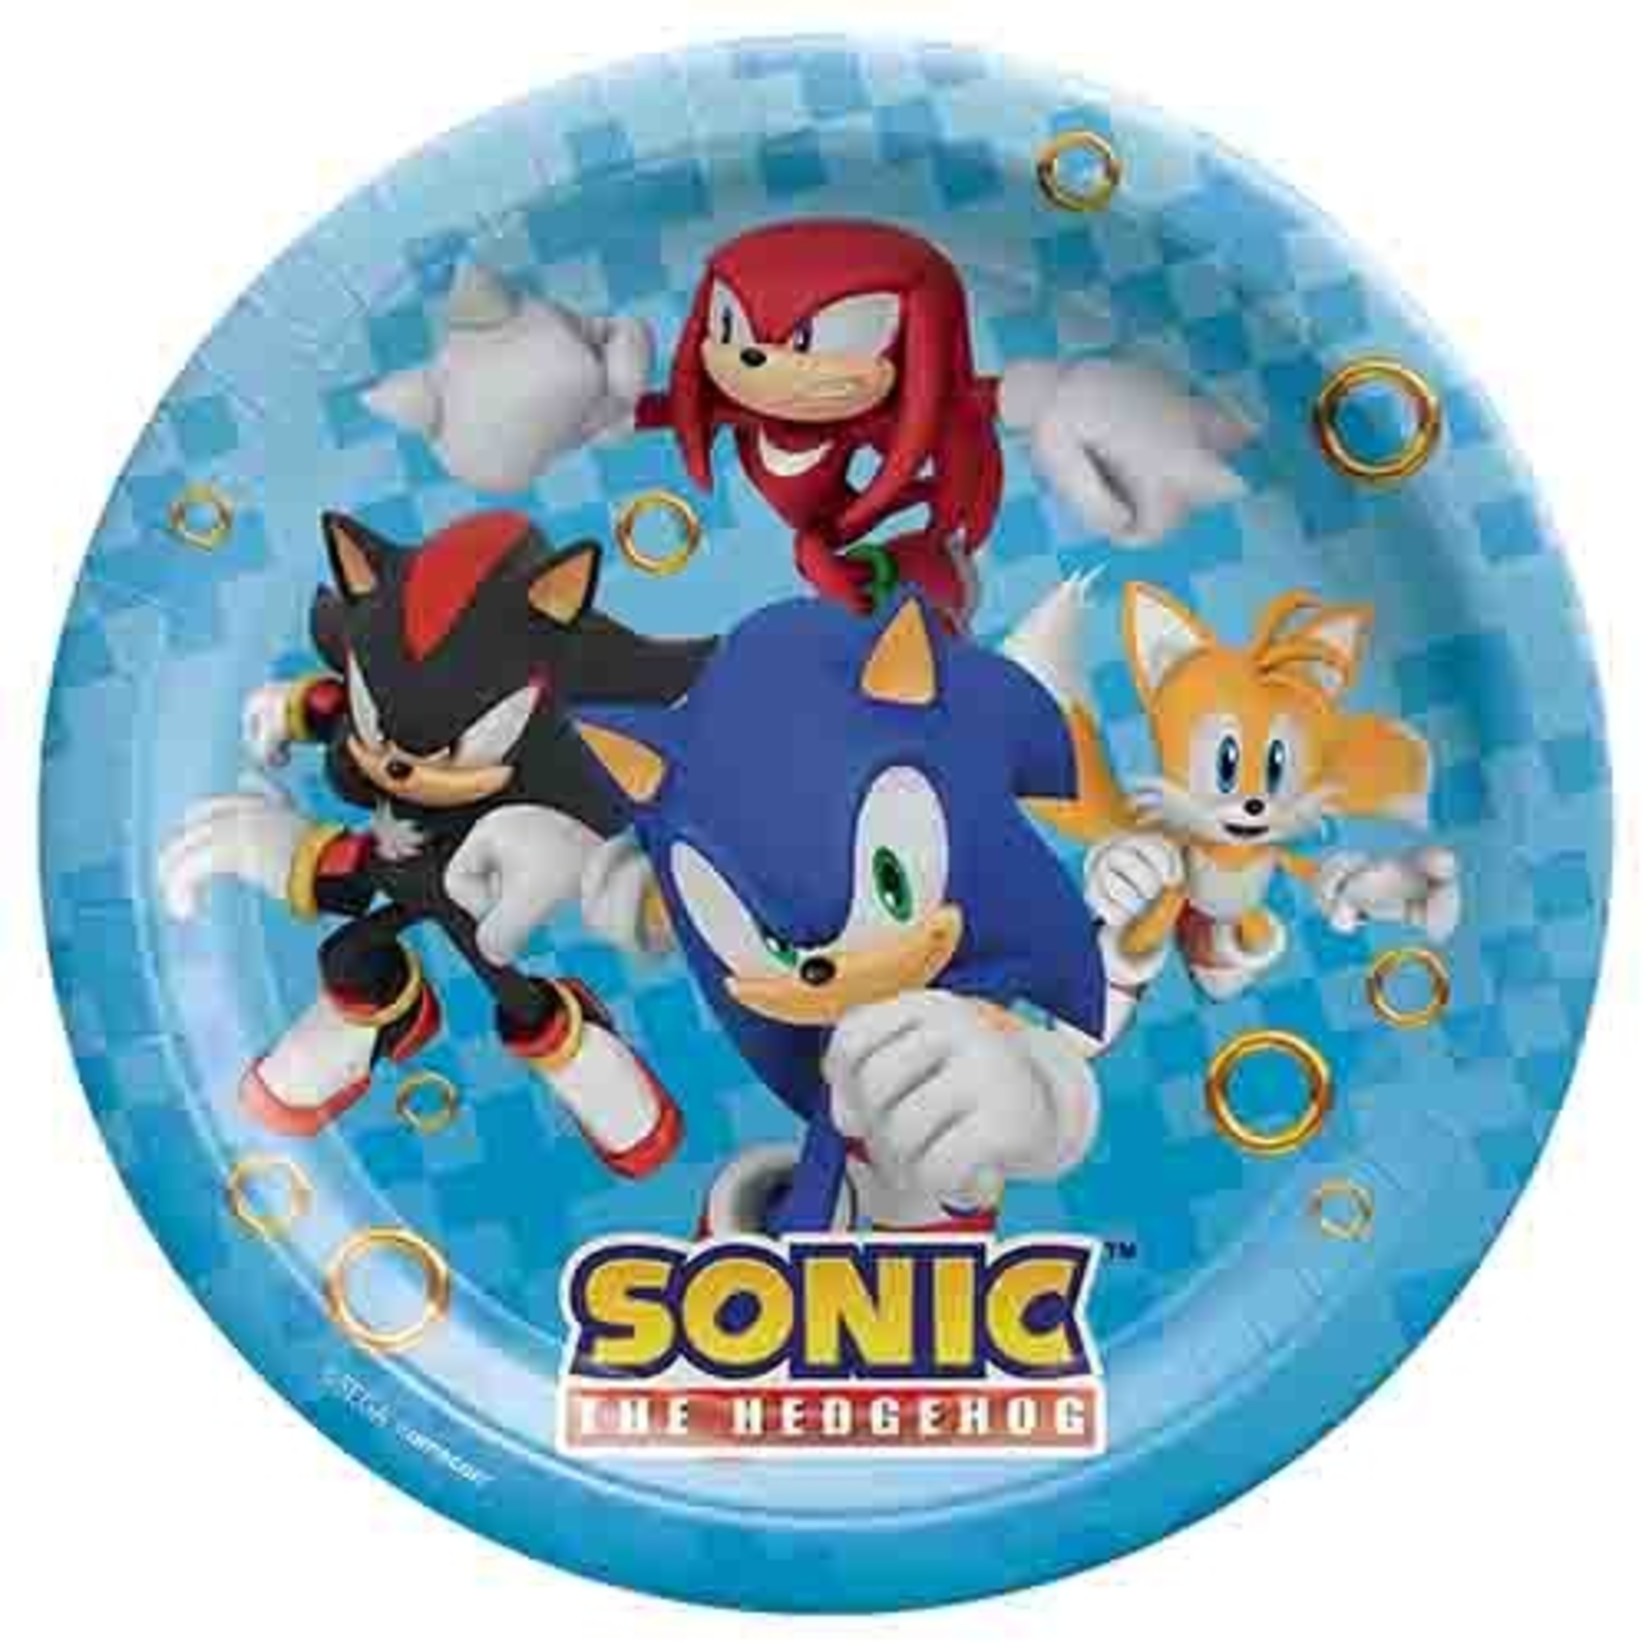 Amscan 9" Sonic The Hedgehog Plates - 8ct.